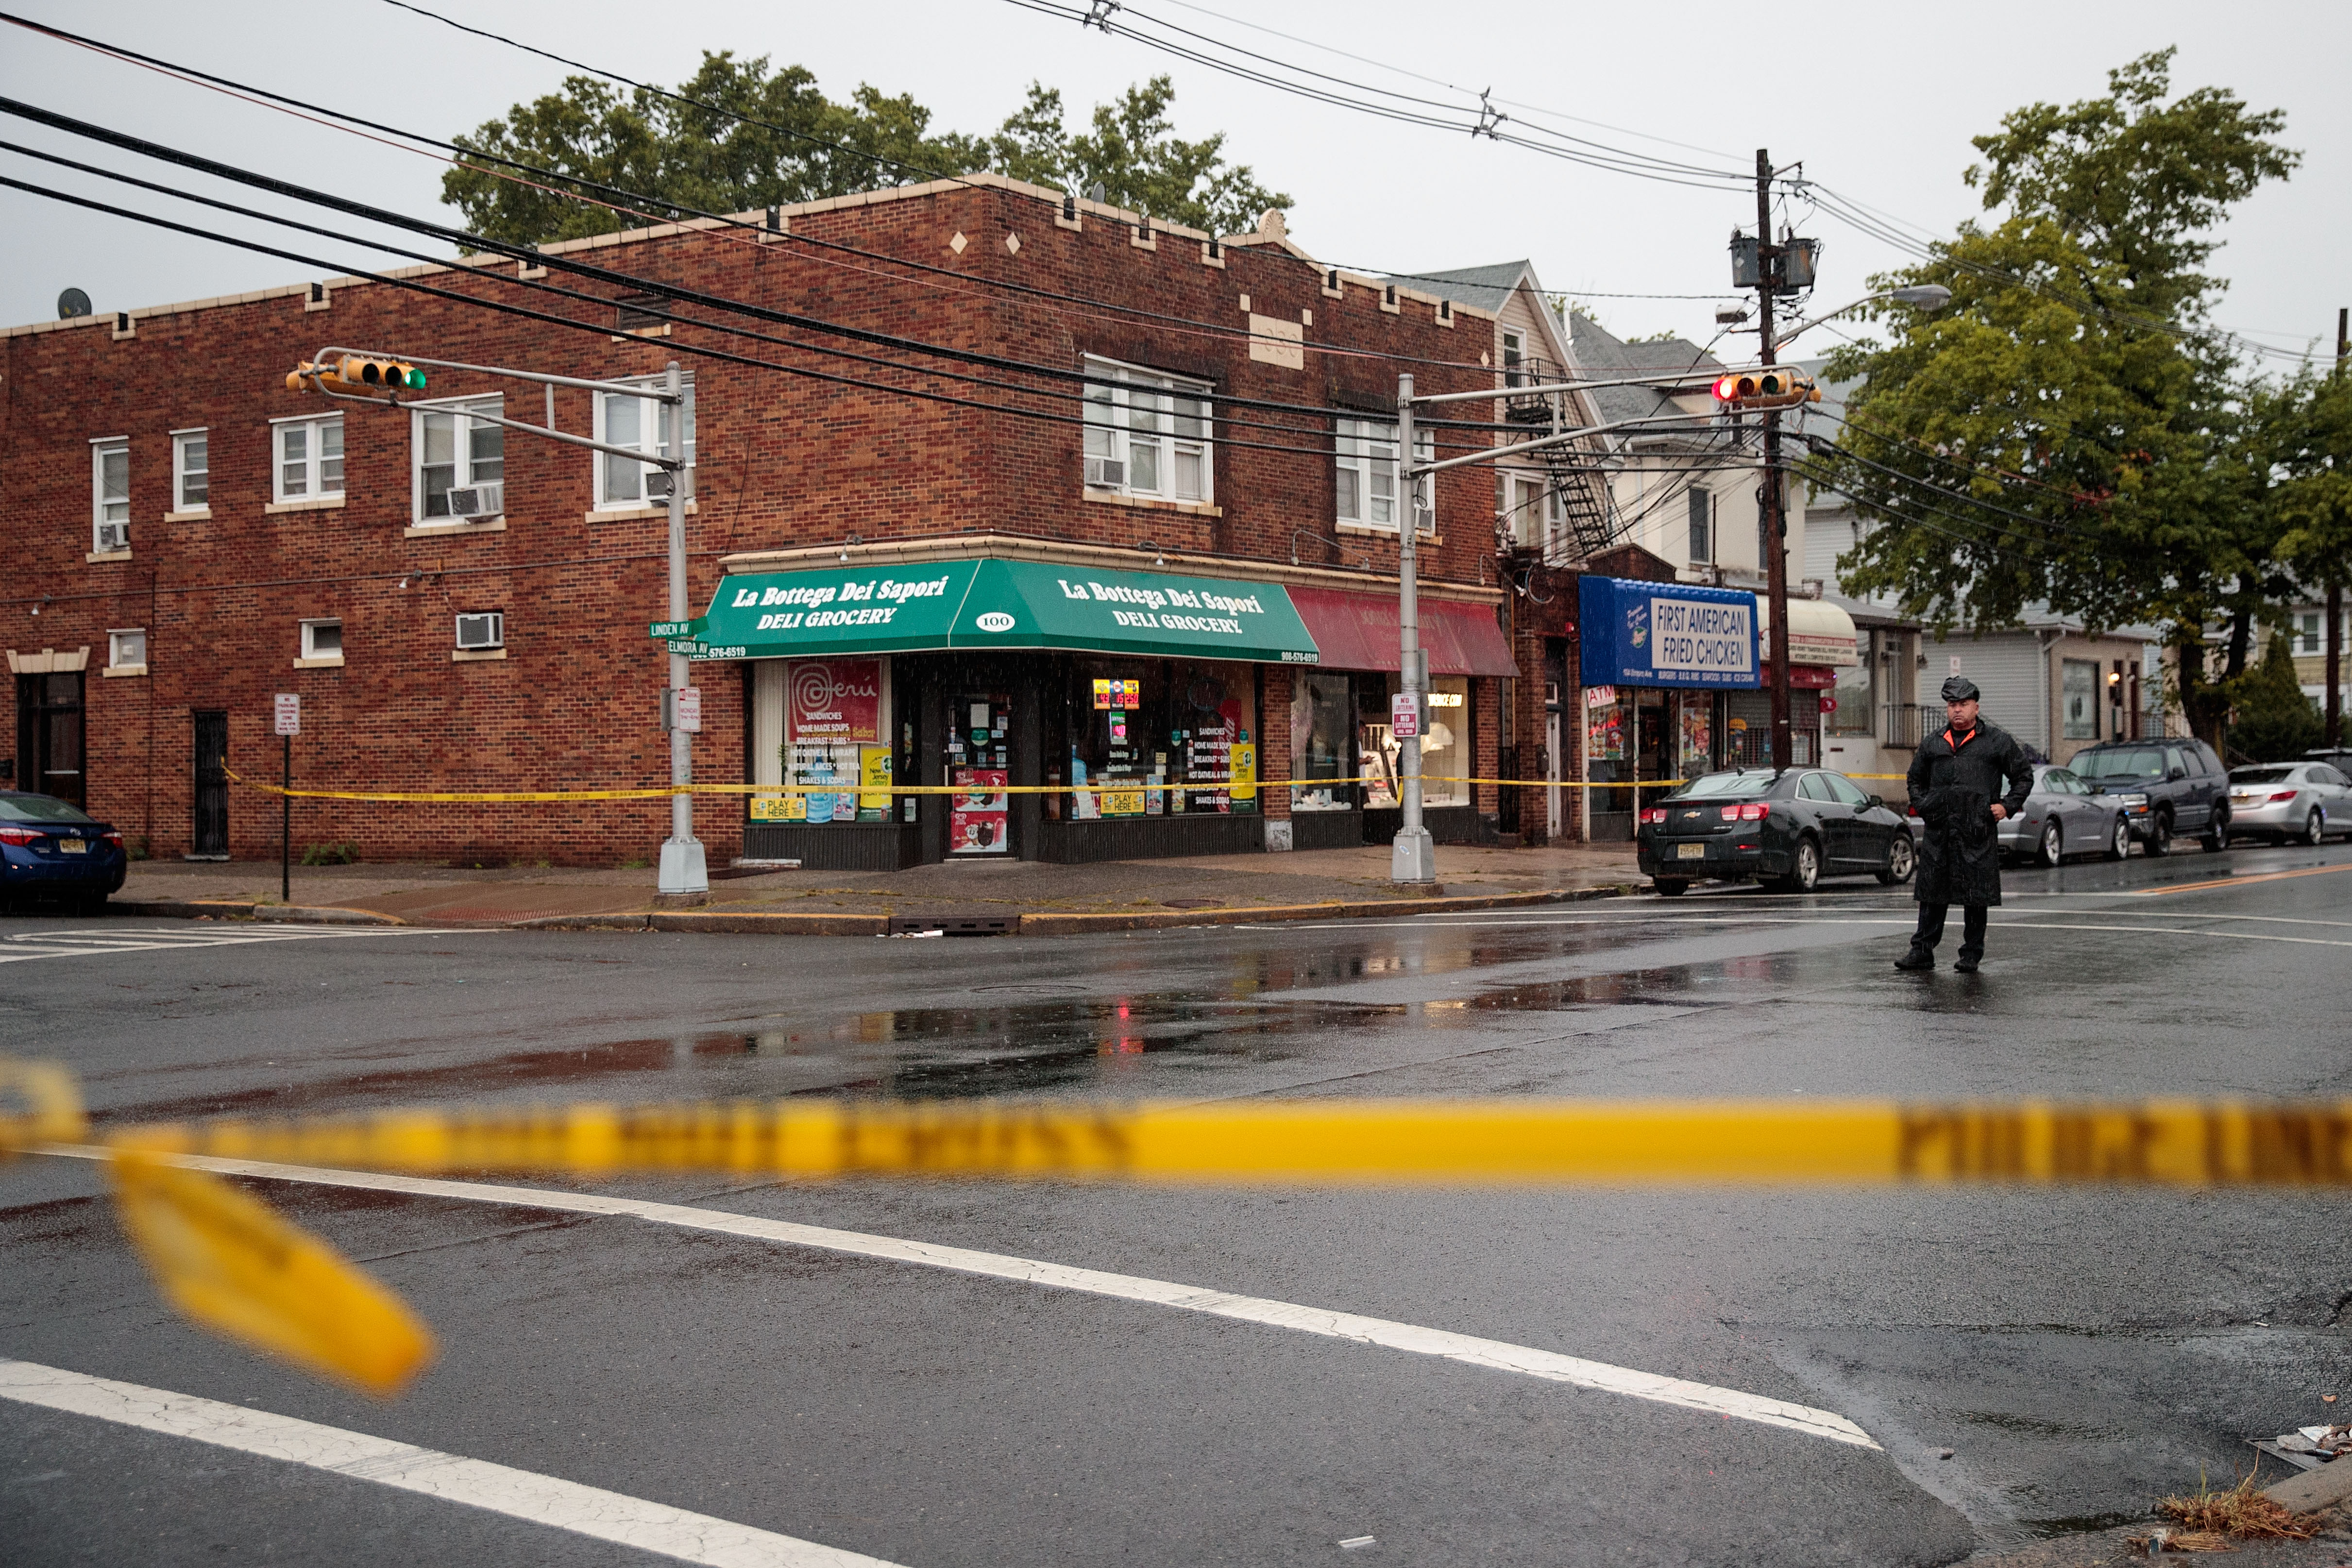 A local police officer stands guard at an intersection as members of the Federal Bureau of Investigation and other law enforcement officials investigate a residence in connection to Saturday night's bombing in Manhattan on September 19, 2016 in Elizabeth, New Jersey. (Getty)